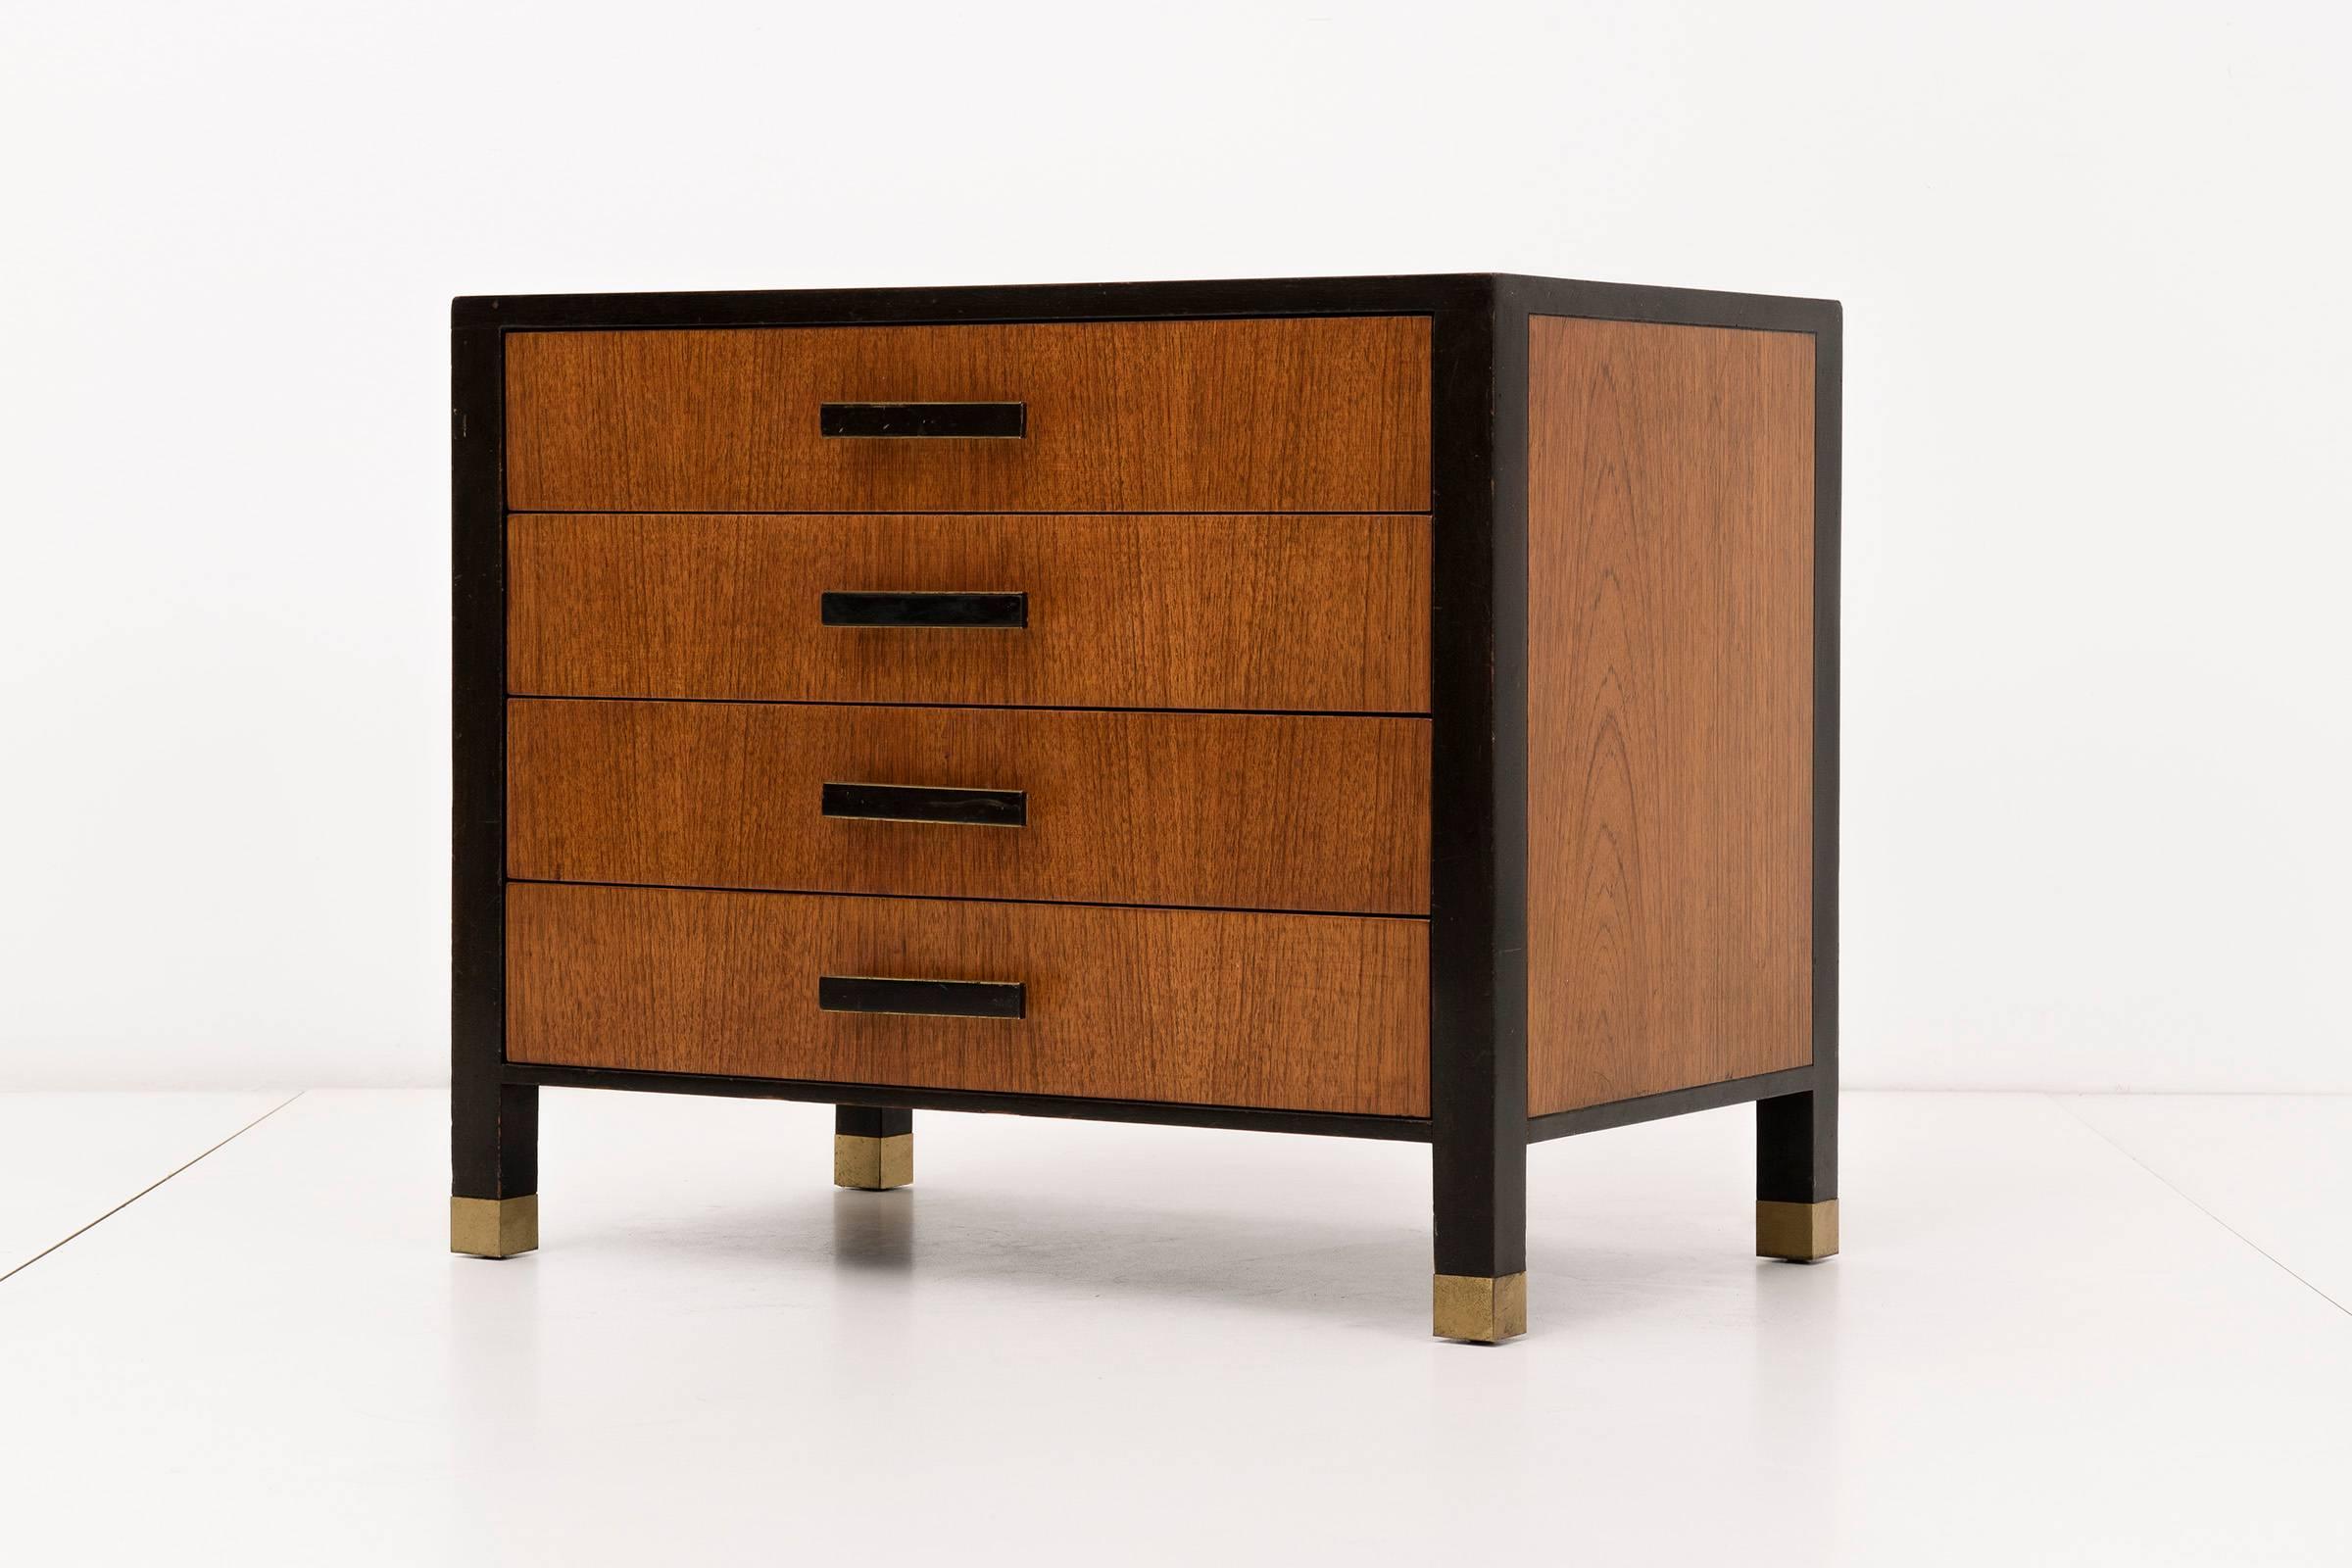 Pair of Harvey Probber side tables. Two-toned tone rosewood and walnut lacquered wood finish with brass feet and pulls details.
[Signed label Harvey Probber Modern].